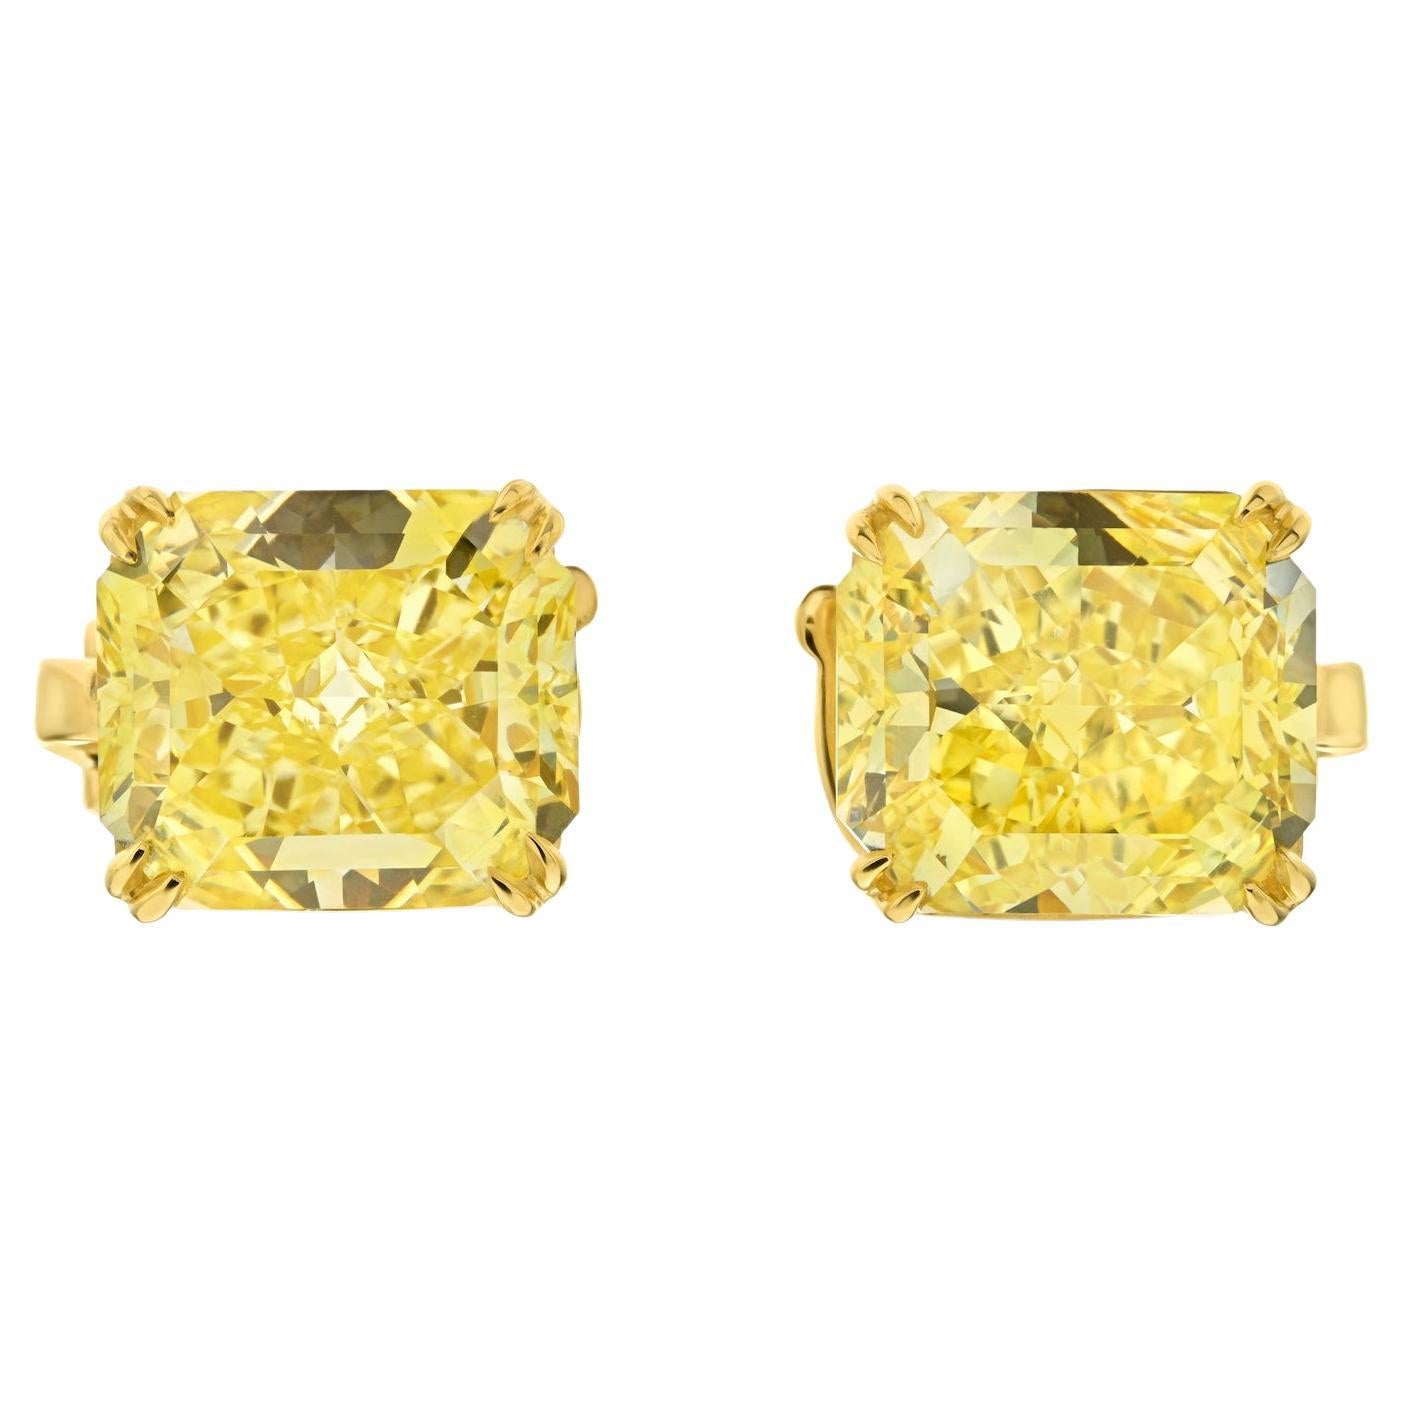 Gold and 12.09ct Radiant Cut Fancy Intense Yellow Diamond Stud Earrings